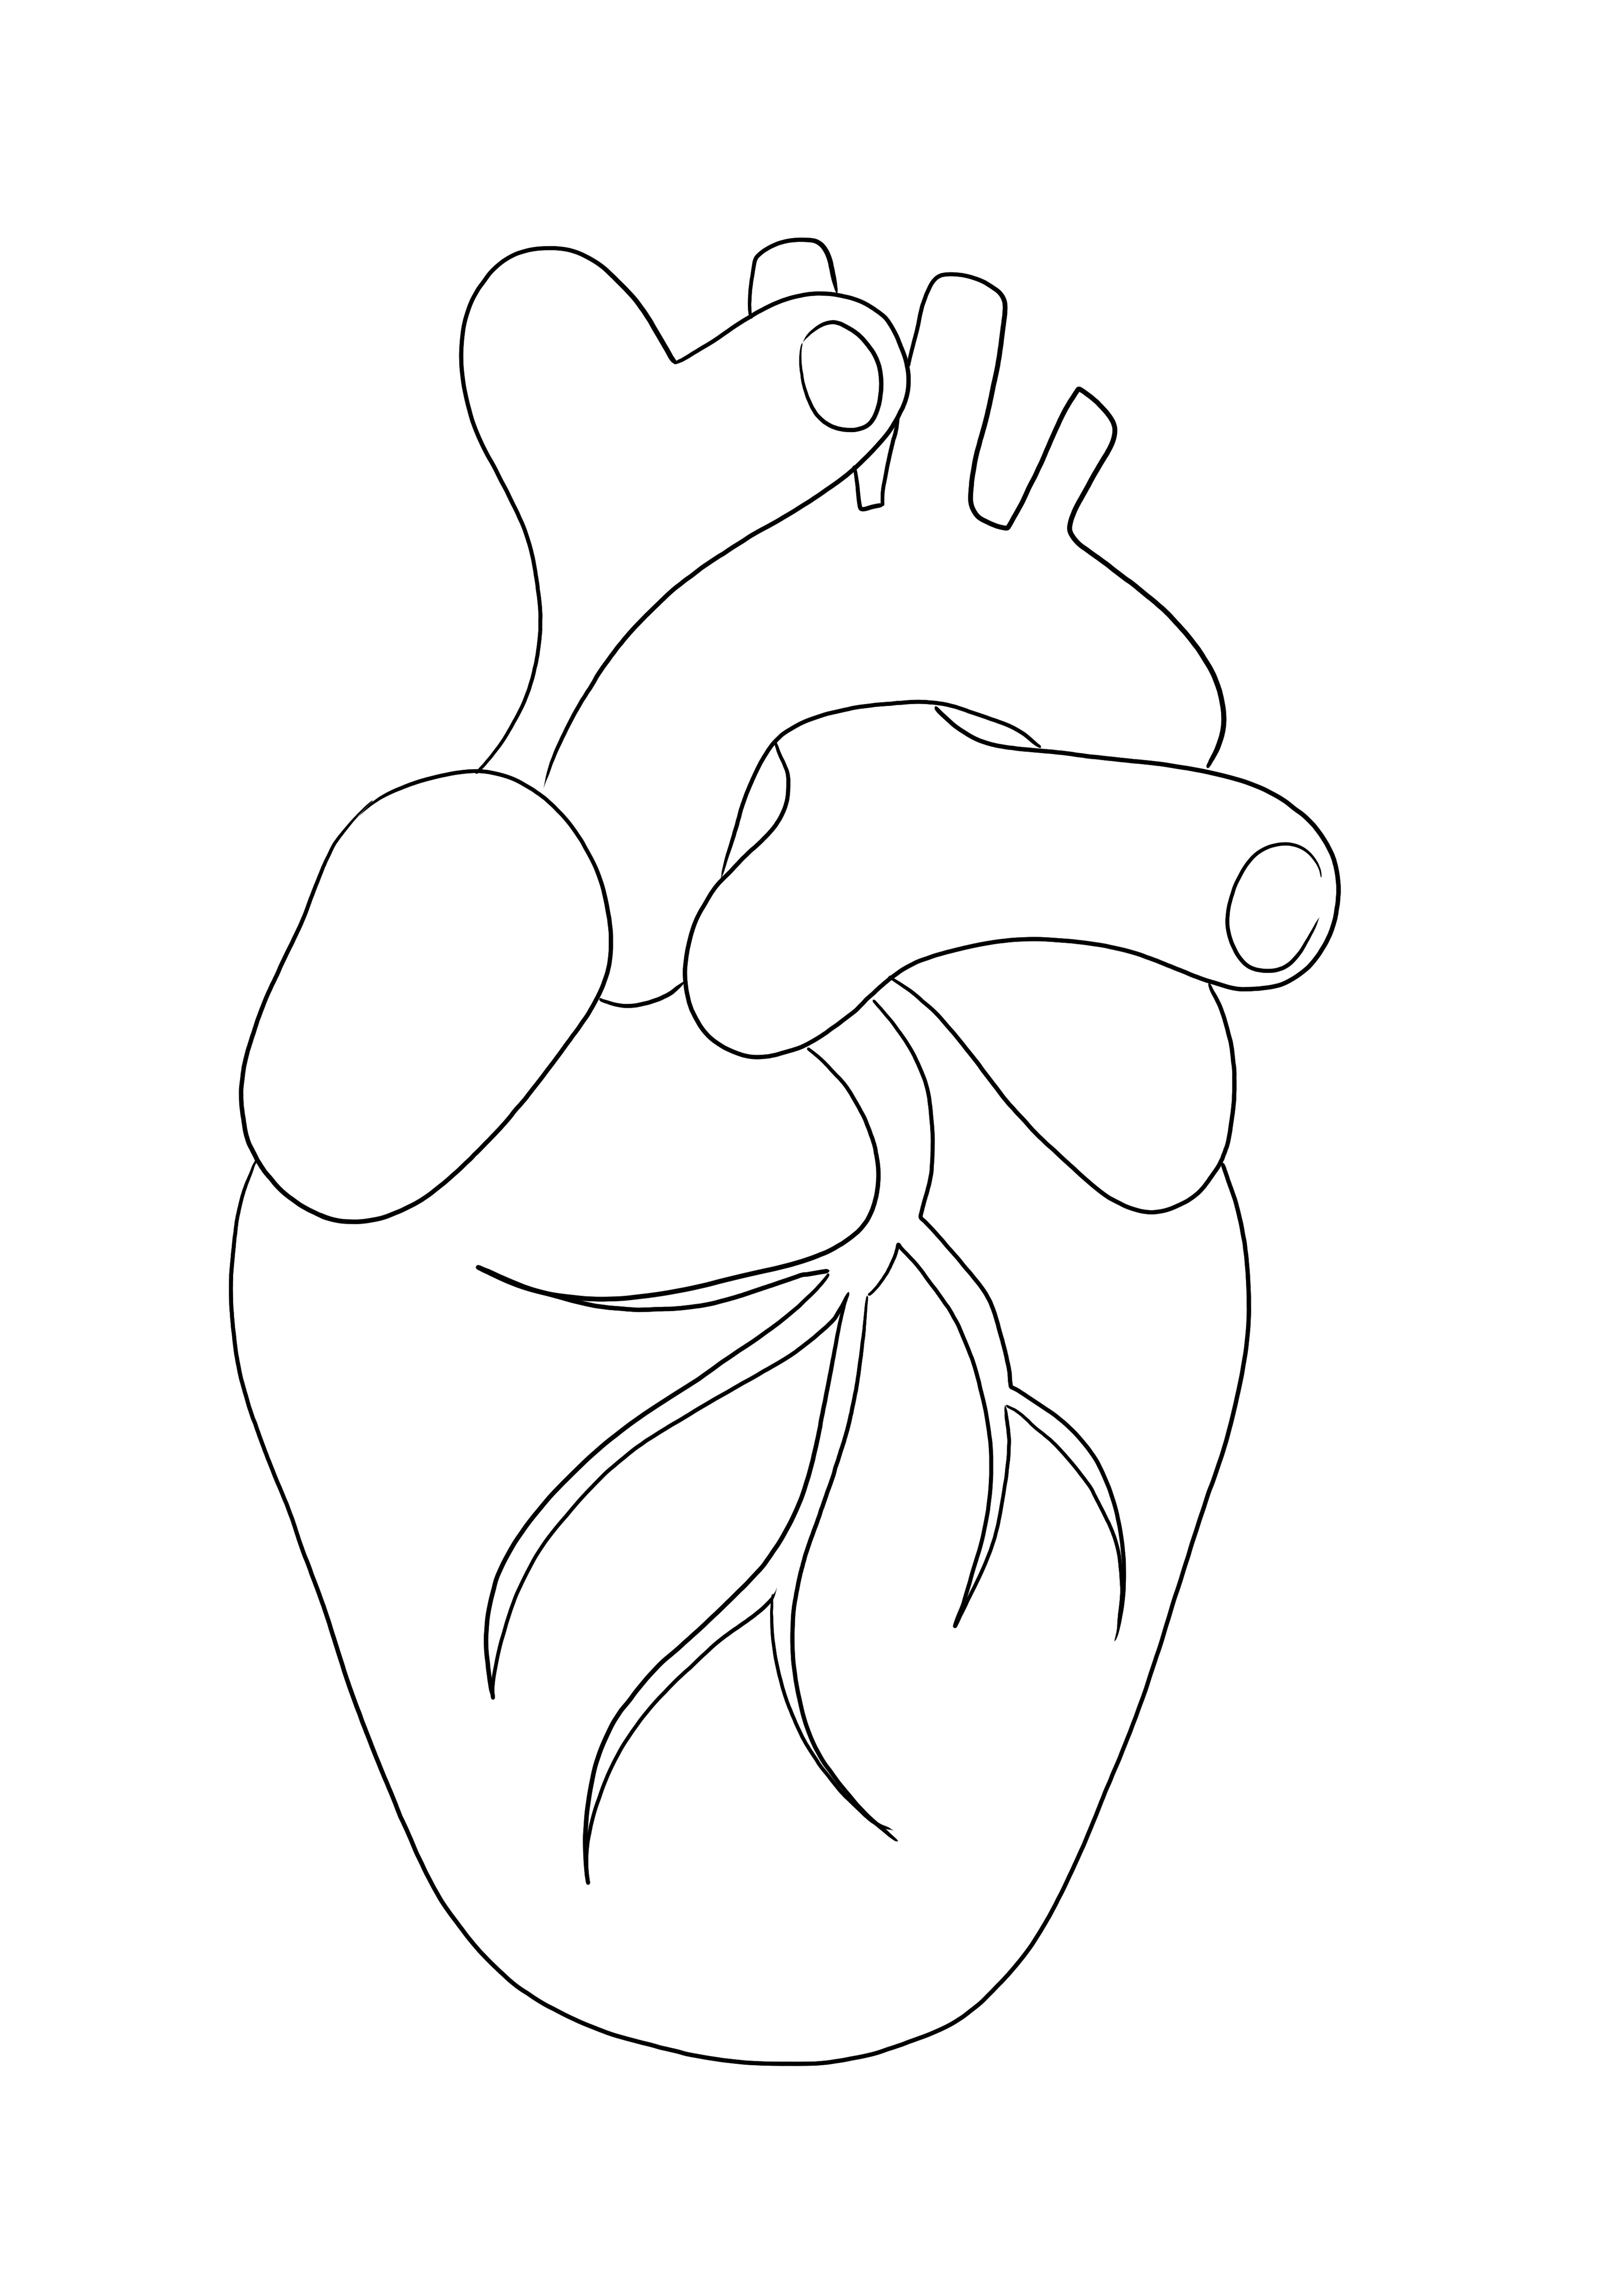 Human Heart-a free printable for coloring for kids to learn about anatomy